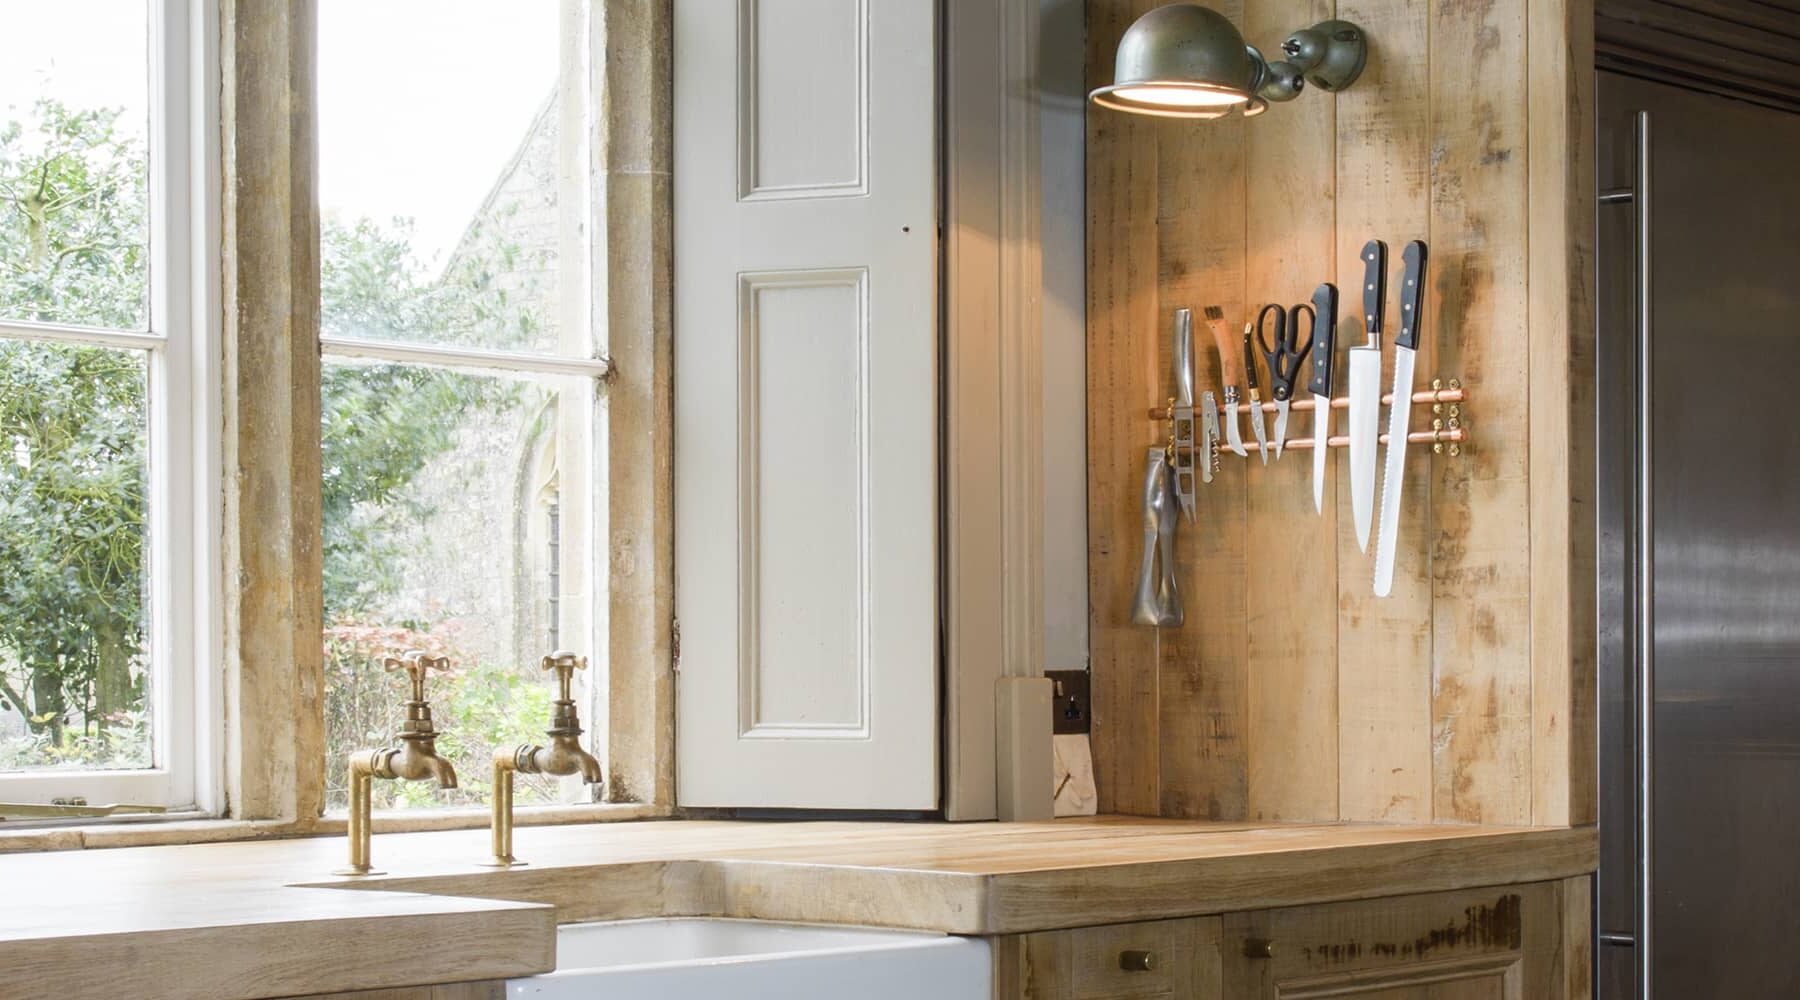 Rustic oak kitchen with large stainless steel fridge freezer and large sunken ceramic sink. designed by Mia Marquez